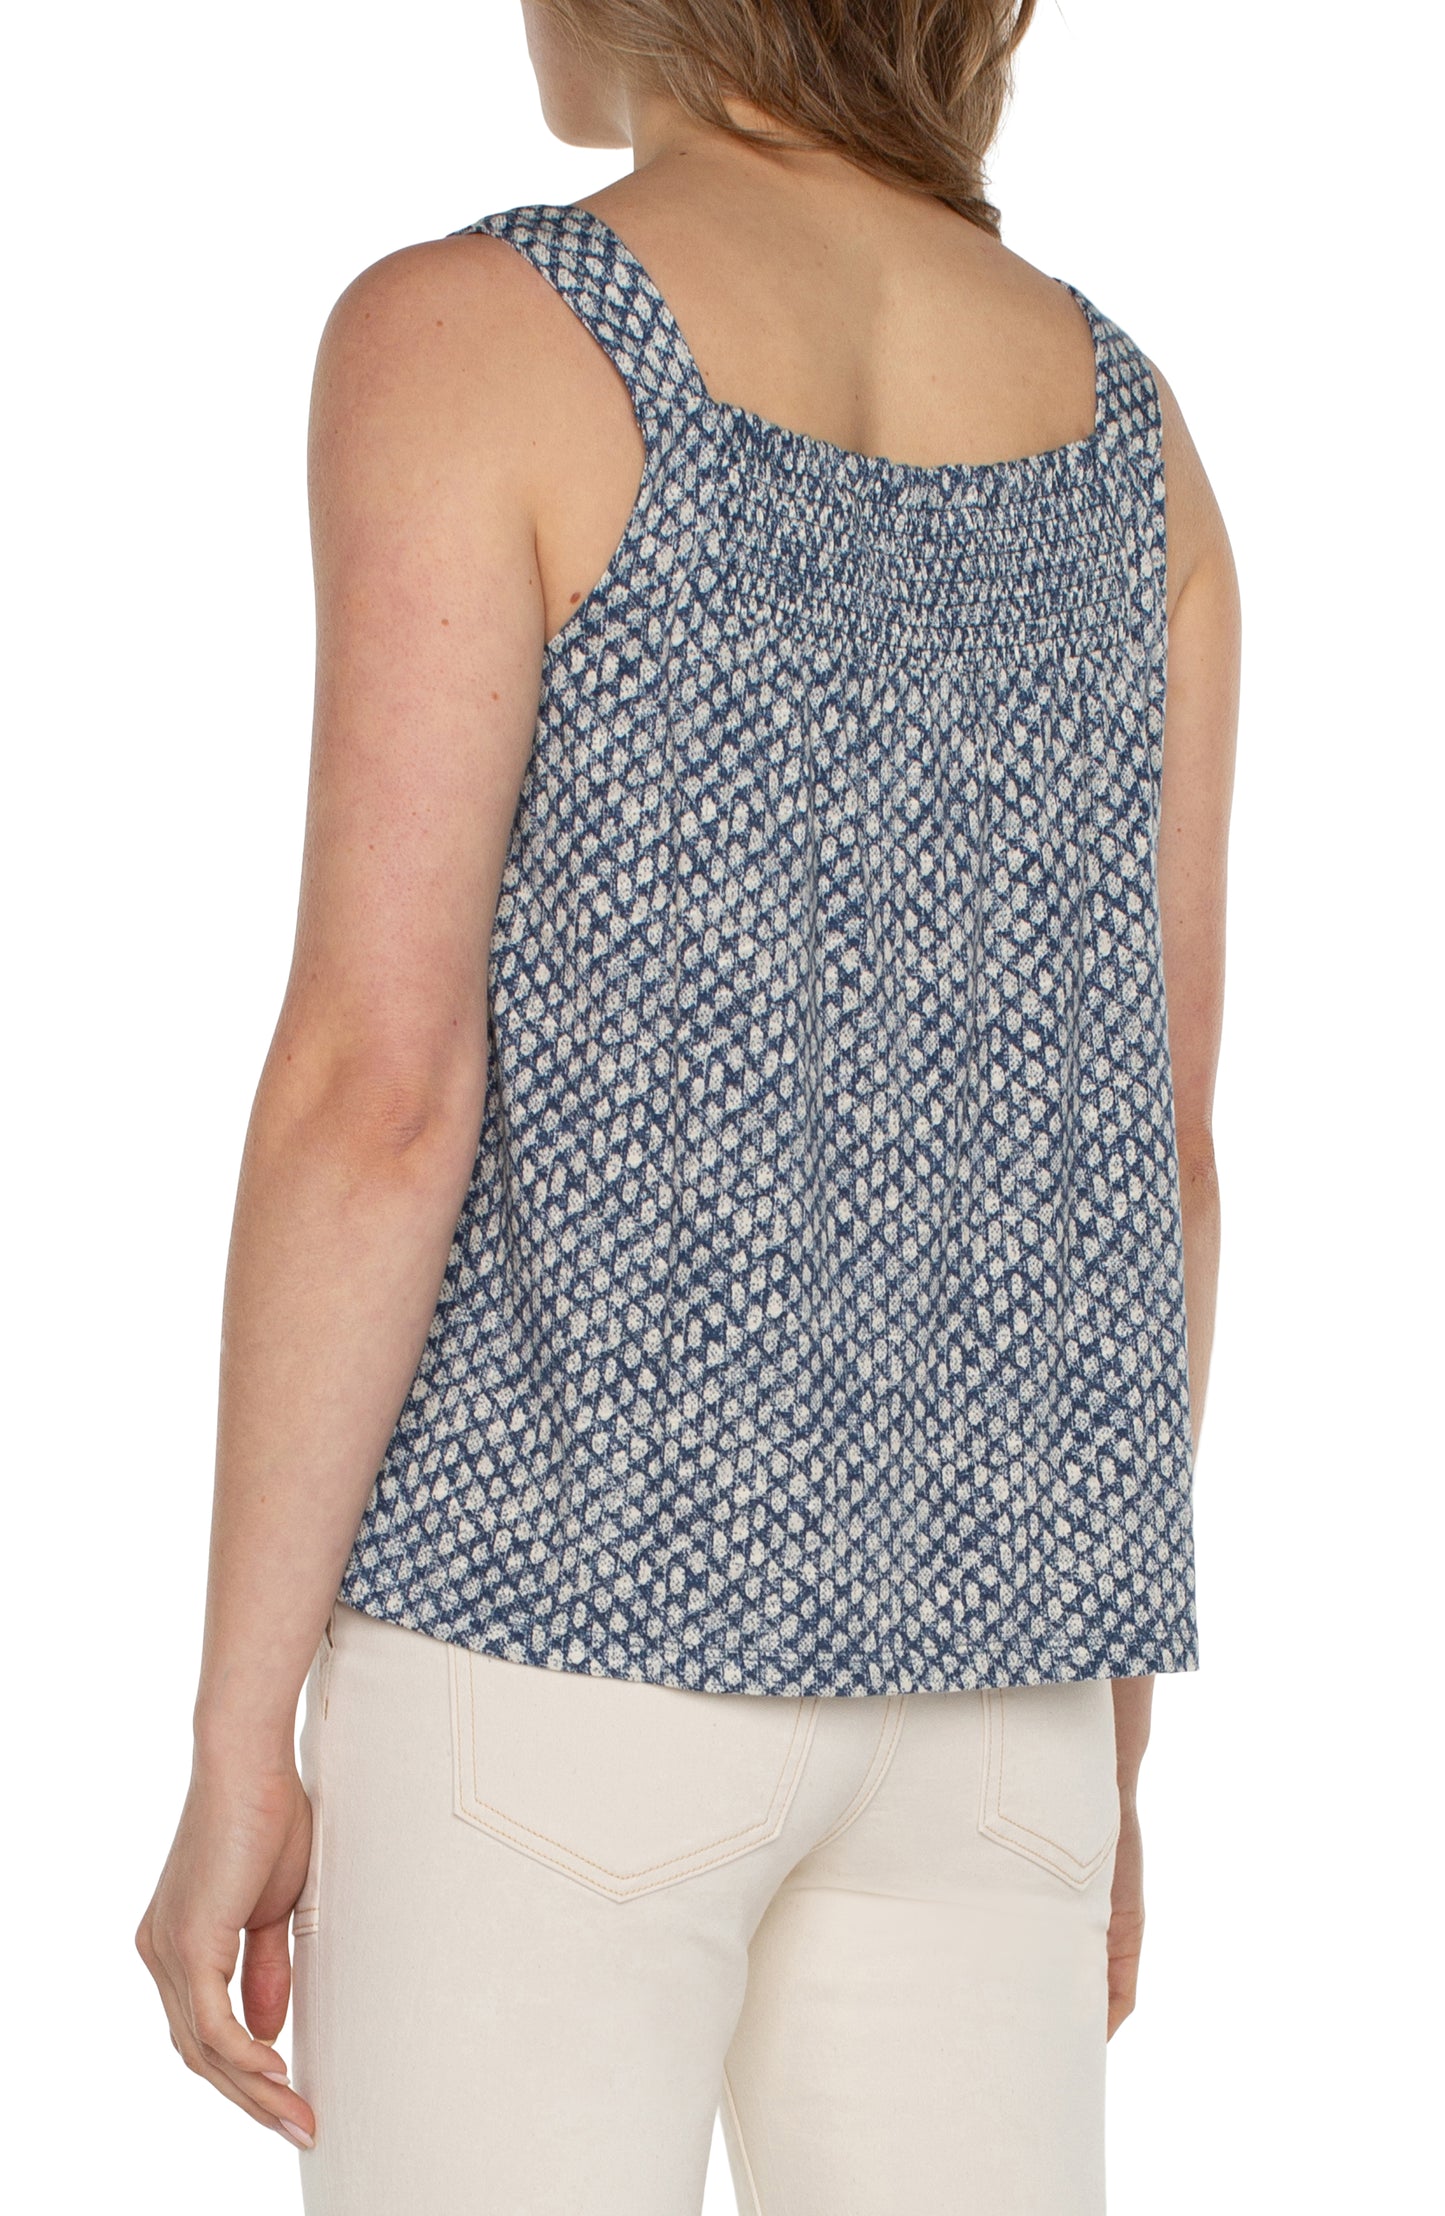 Liverpool Sleeveless V-Neck Easy Fit Tank with Smocking (Navy Text Dots)